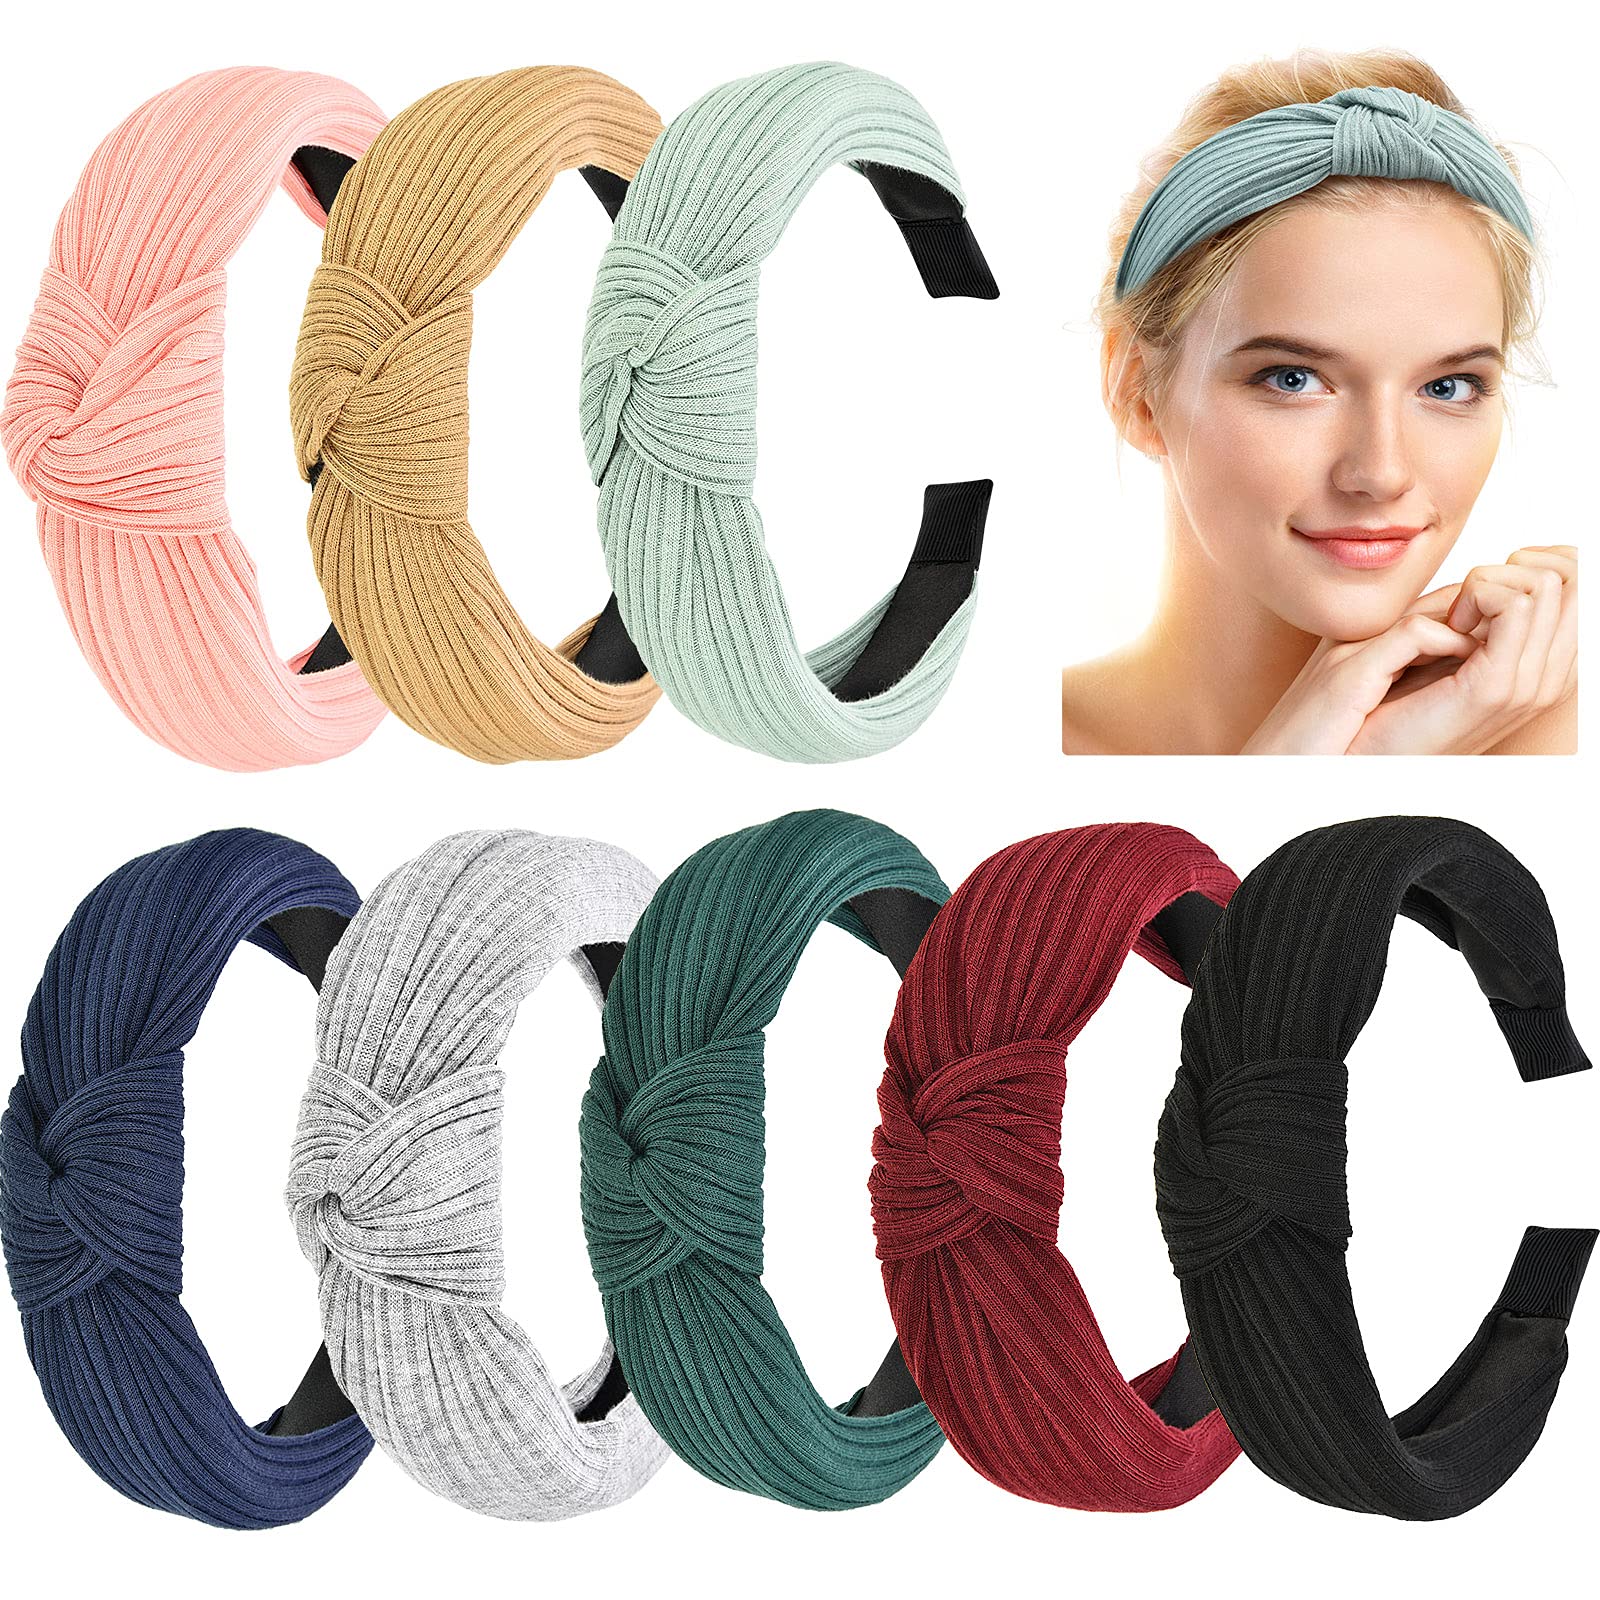 Maxdot 8 Pieces Headbands for Women Knotted Wide Headbands Knotted Wide  Turban Headband Cross Knot Hair Bands Elastic Hair Accessories for Women  and Girls